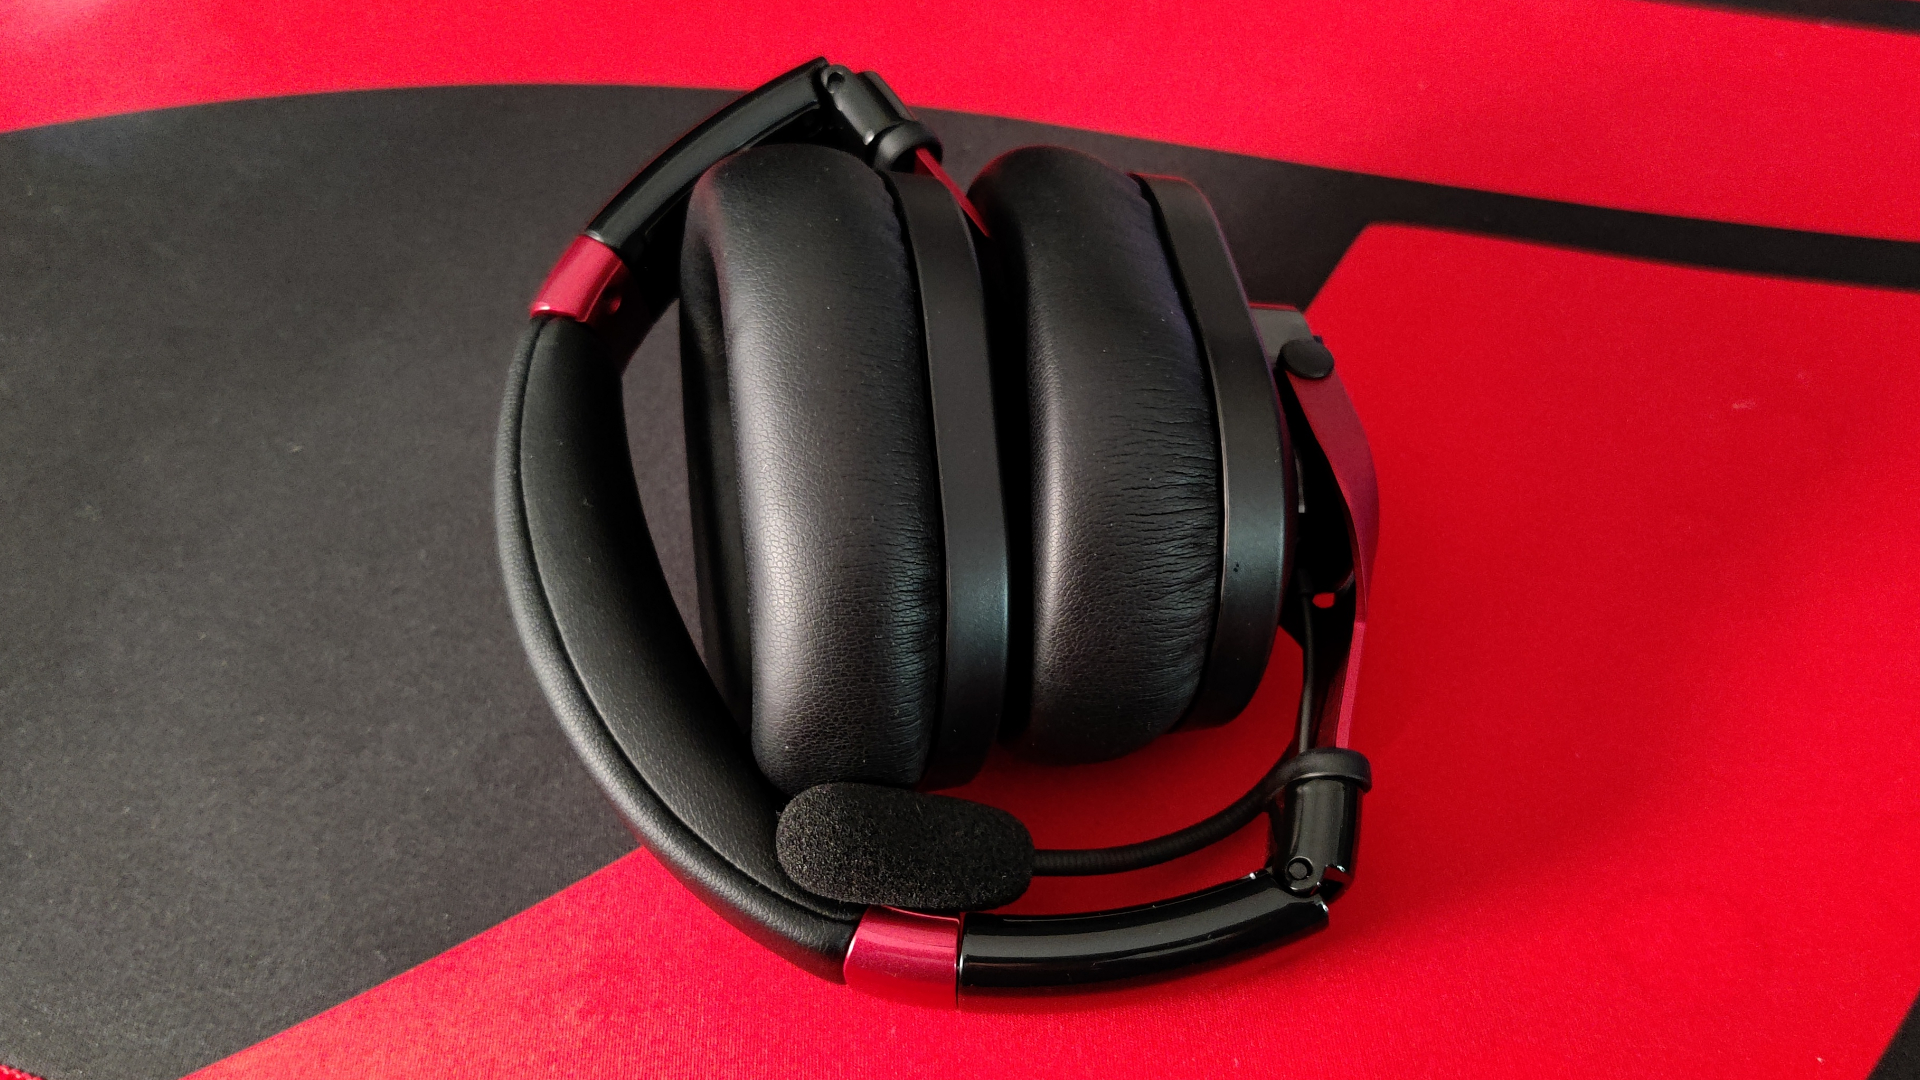 The austrian audio pg16 folded up on a red and black desk.